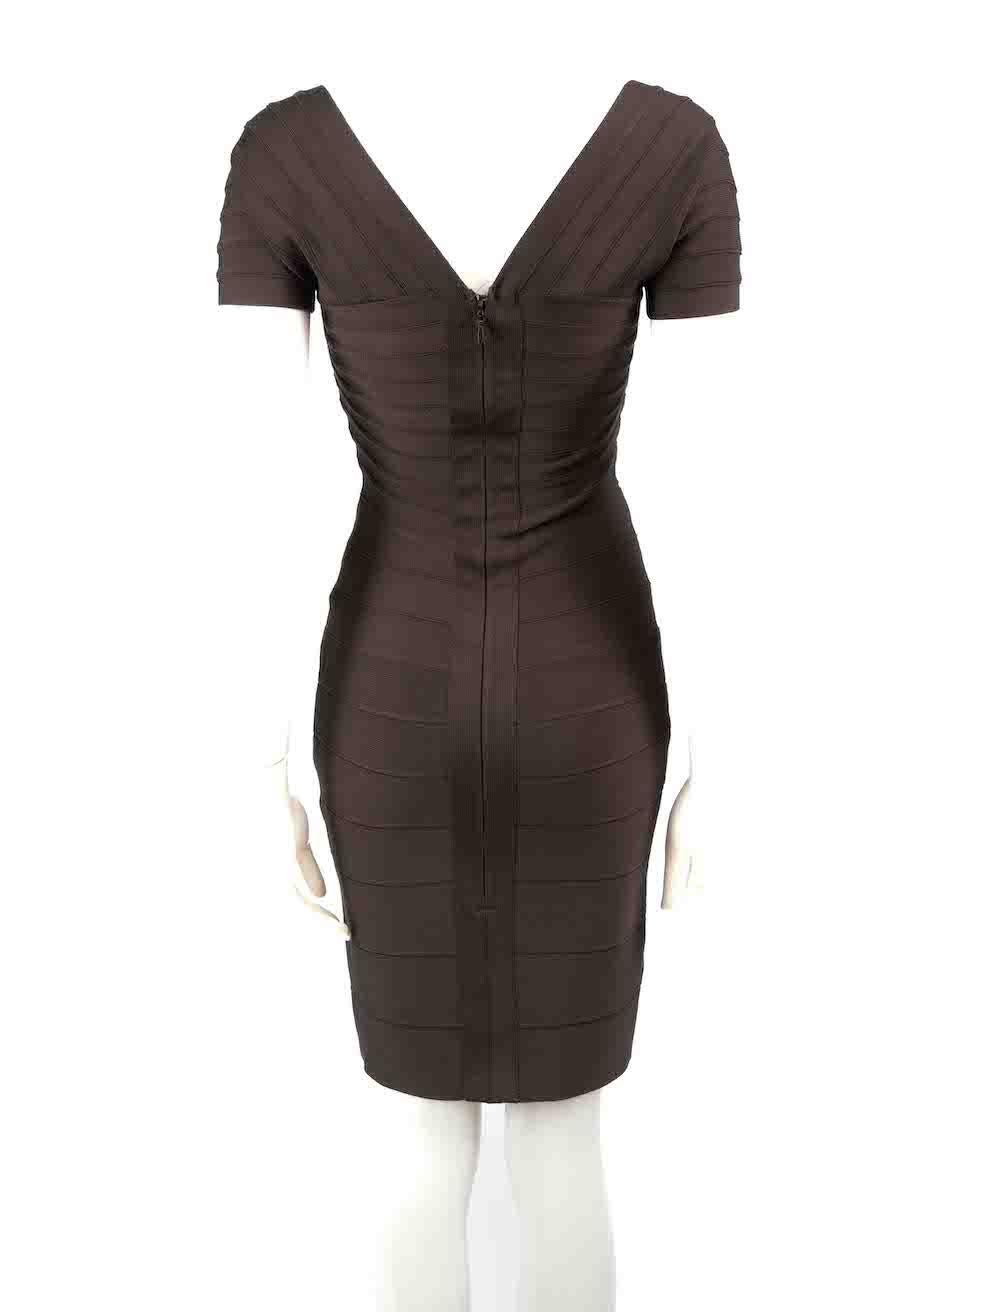 Herve Leger Brown Square Neck Bandage Midi Dress Size XS In Good Condition For Sale In London, GB